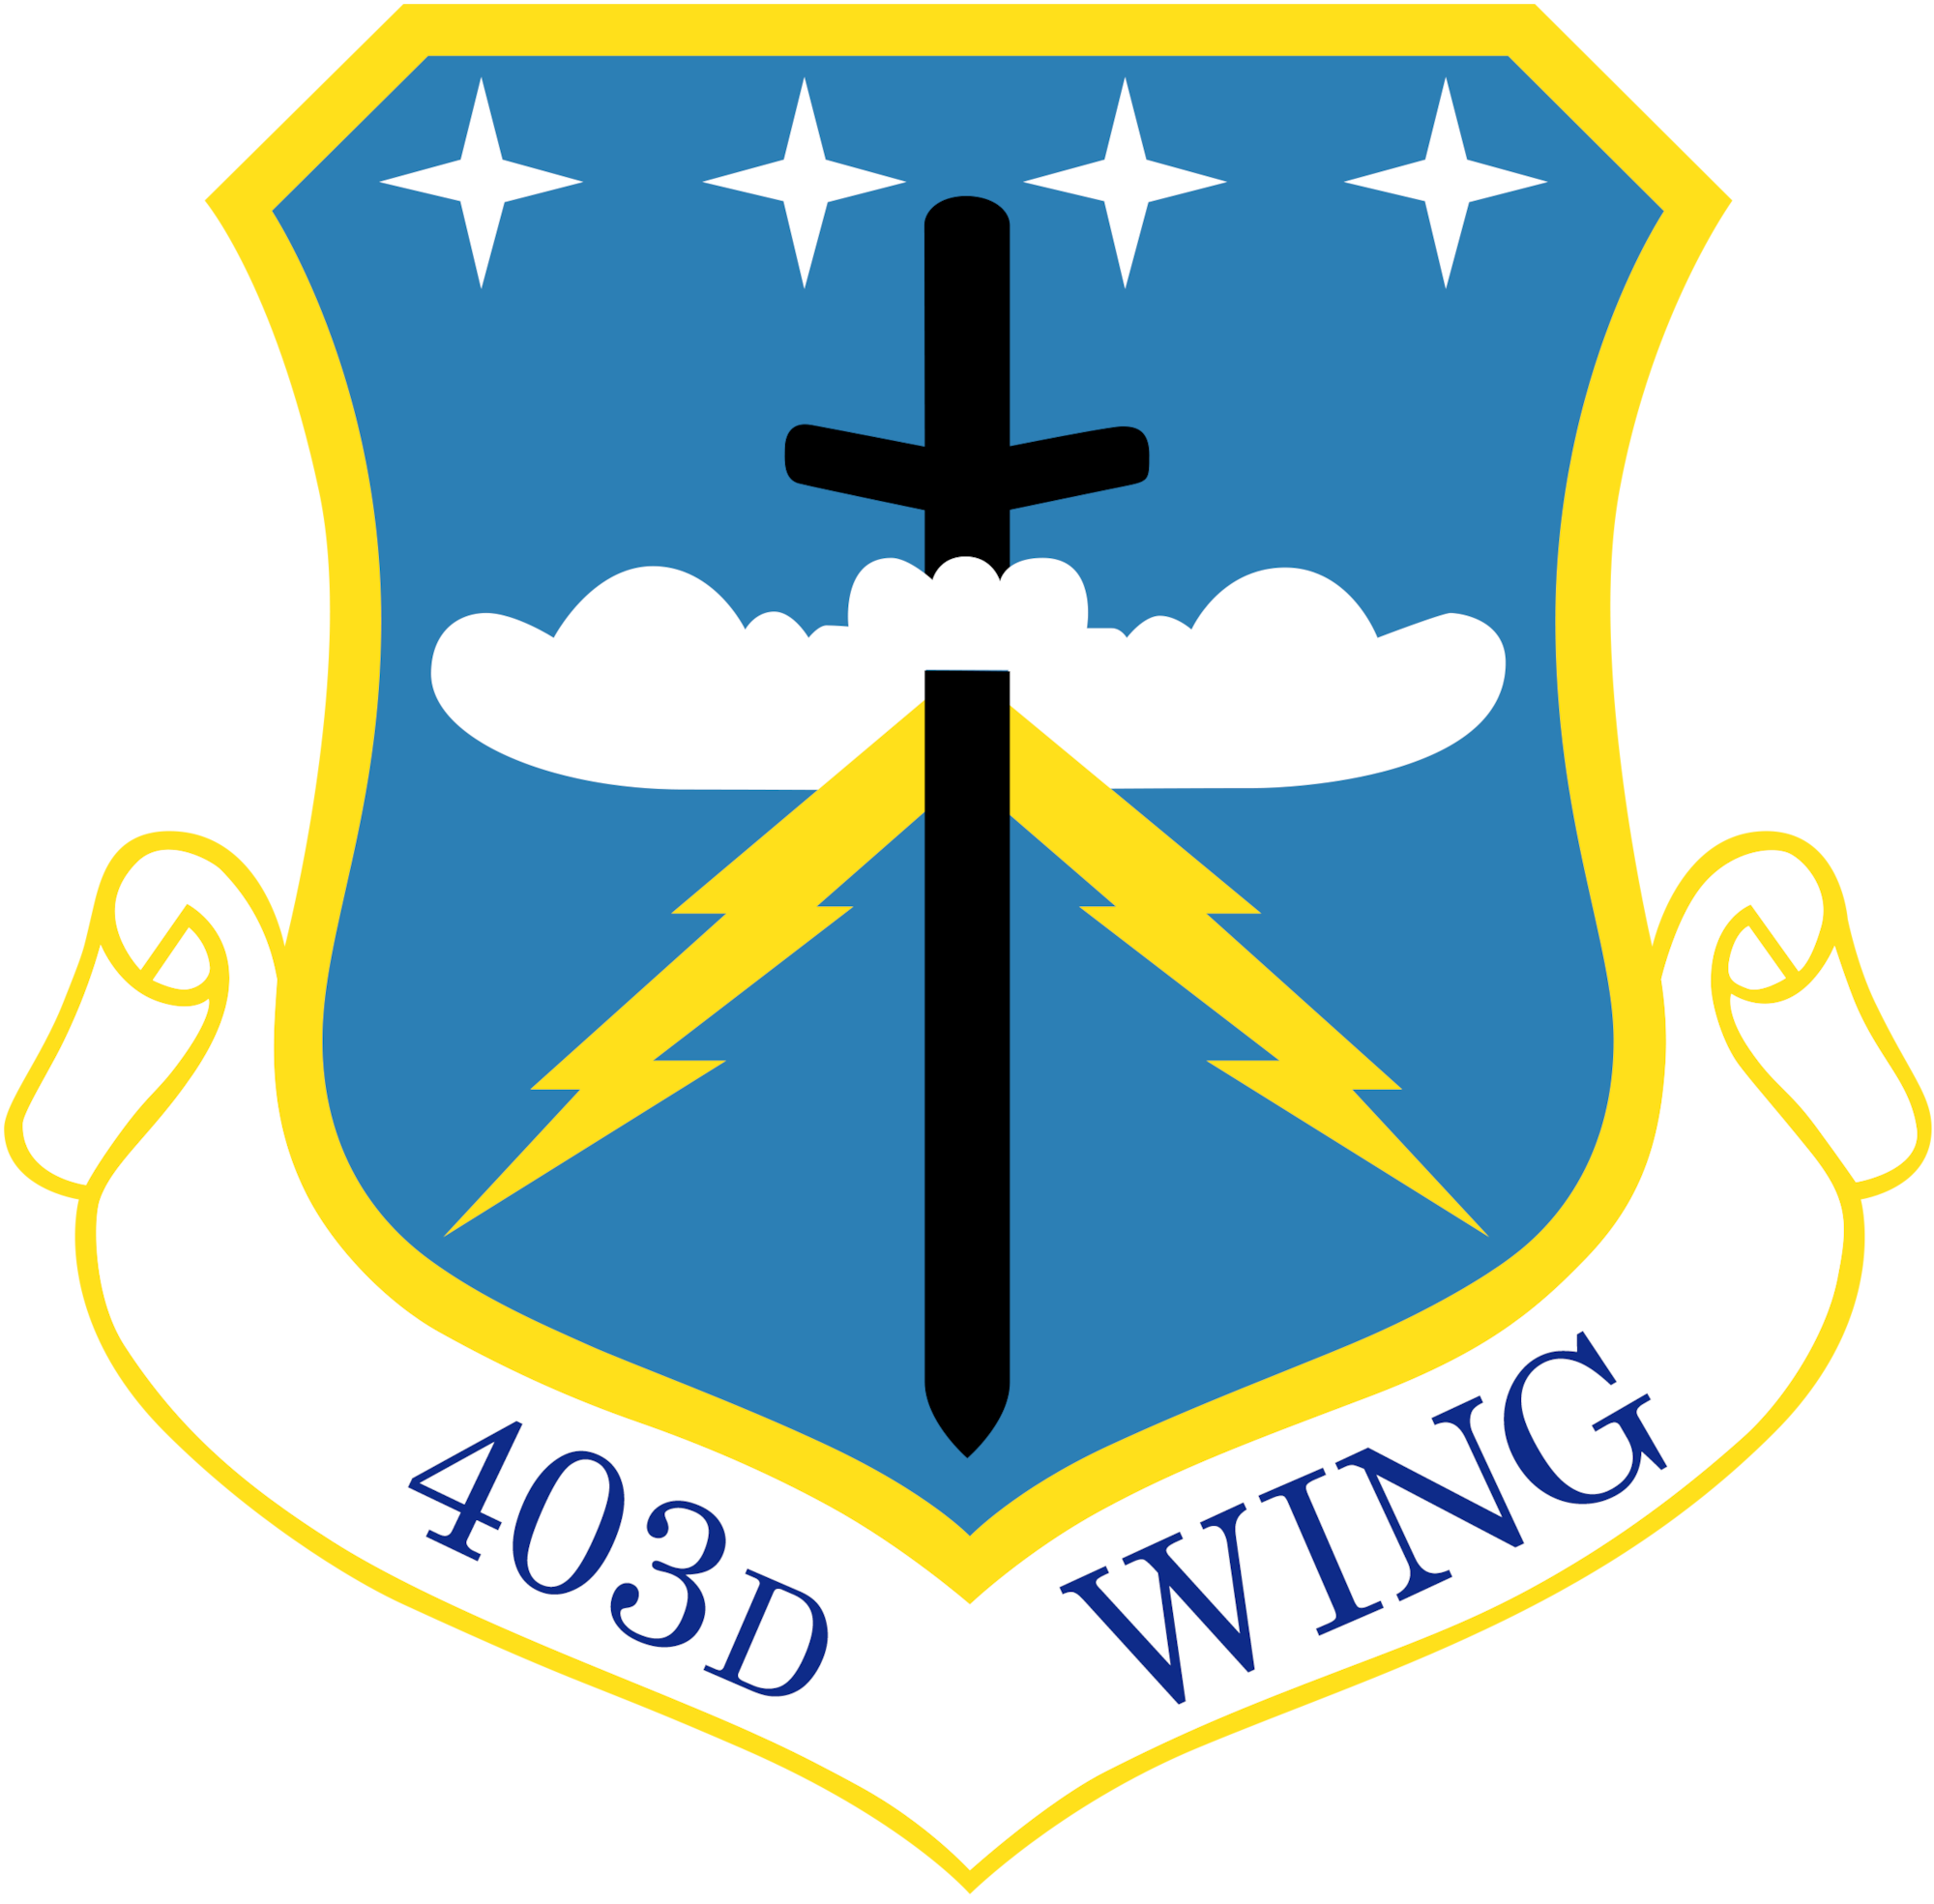 403rd Wing emblem. Caption reads: "The 403rd Wing is the largest flying organization at Keesler, and the only Air Force Reserve Command wing in Mississippi. With a military manning authorization of more than 1,400 reservists, including 250 full-time air reserve technicians, the wing performs dual missions: tactical airlift support during peace- and war-time contingencies, and aerial weather reconnaissance supporting the Department of Commerce."